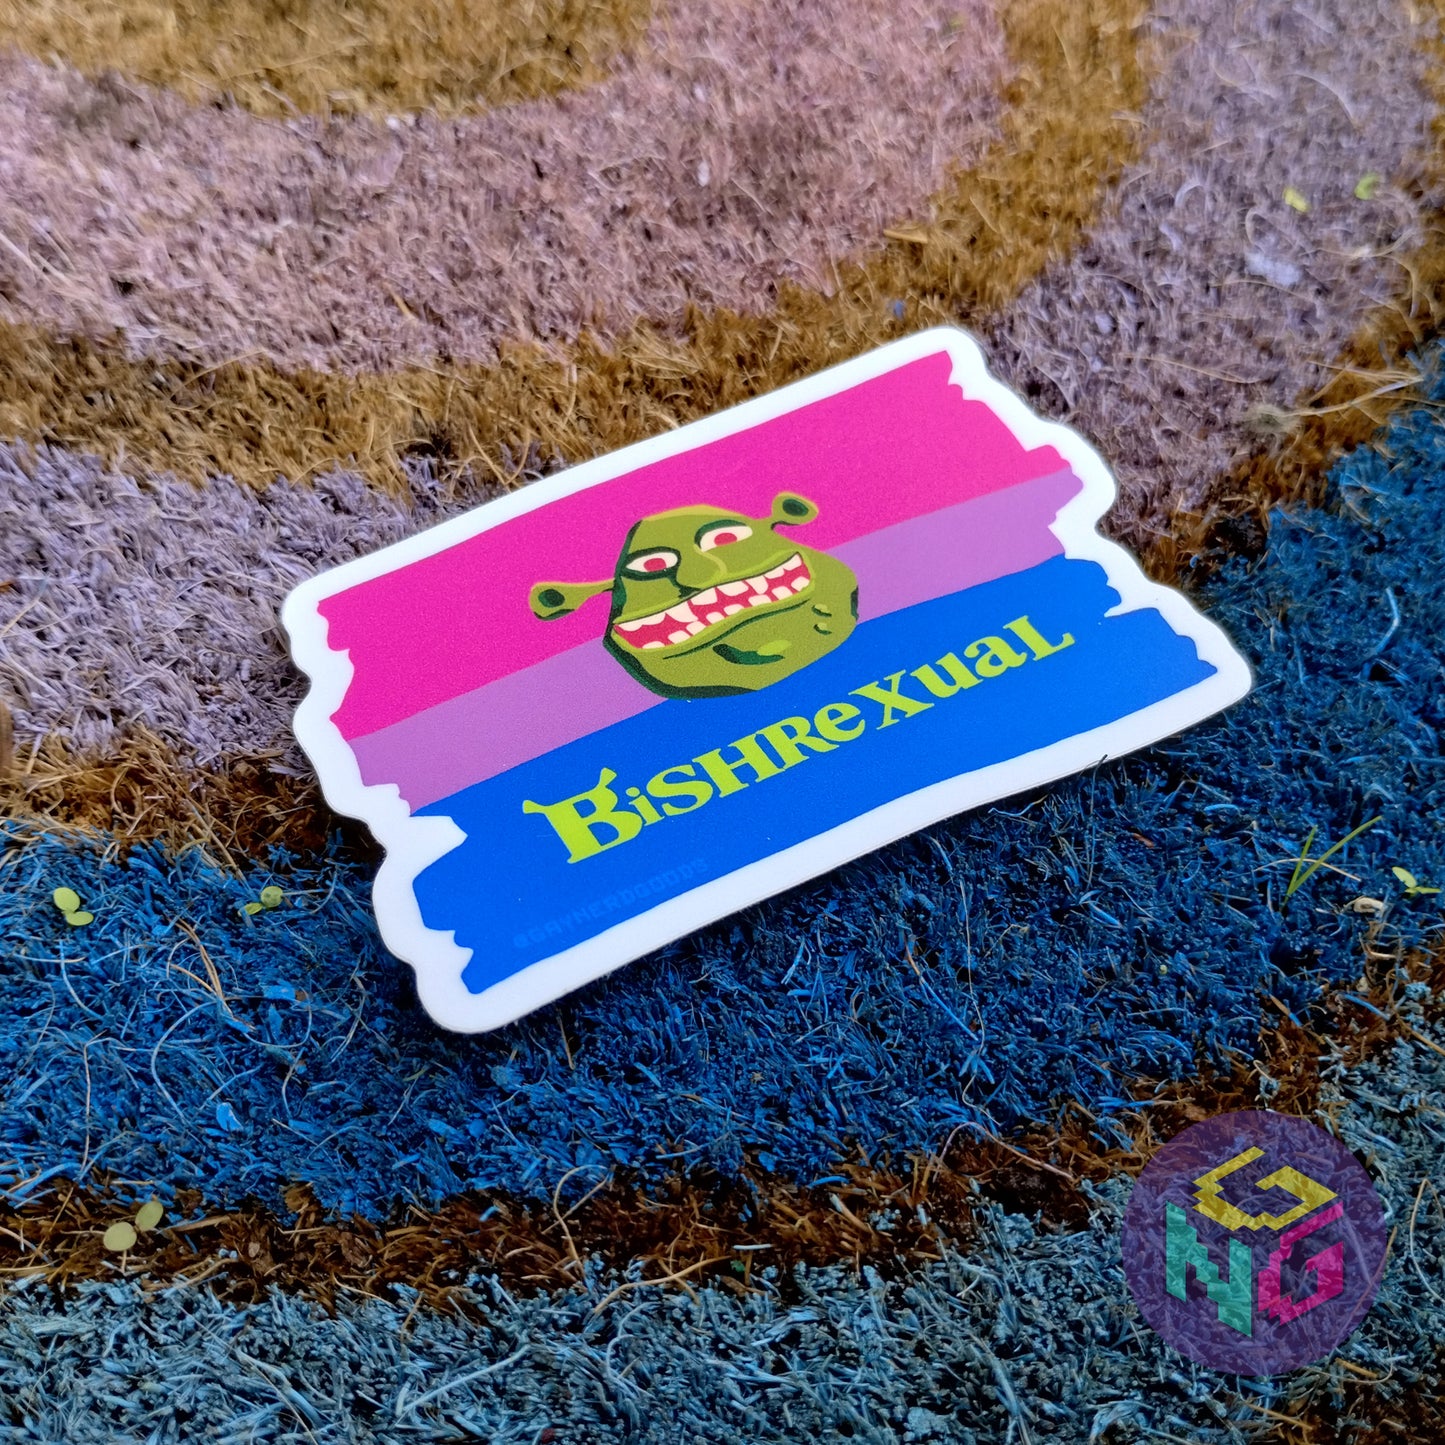 bishrexual sticker lying at an angle on top of the rainbow welcome mat